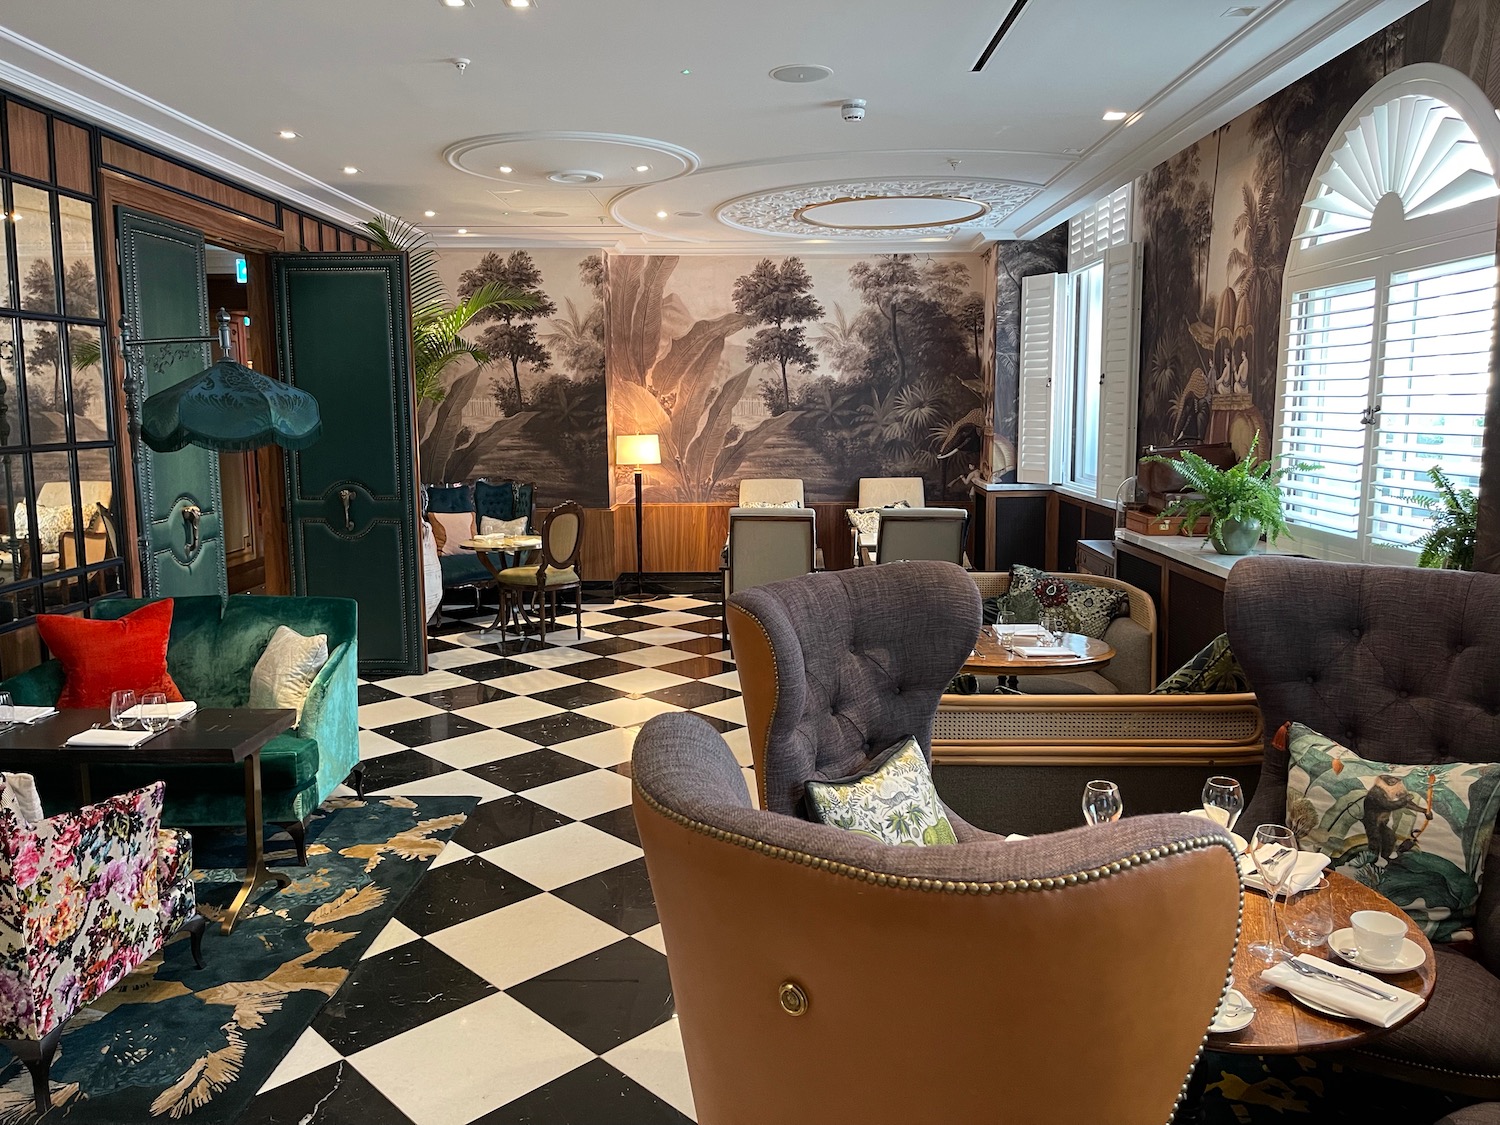 Great Scotland Yard Hotel - The Unbound Collection by Hyatt Review - The  Luxury Editor